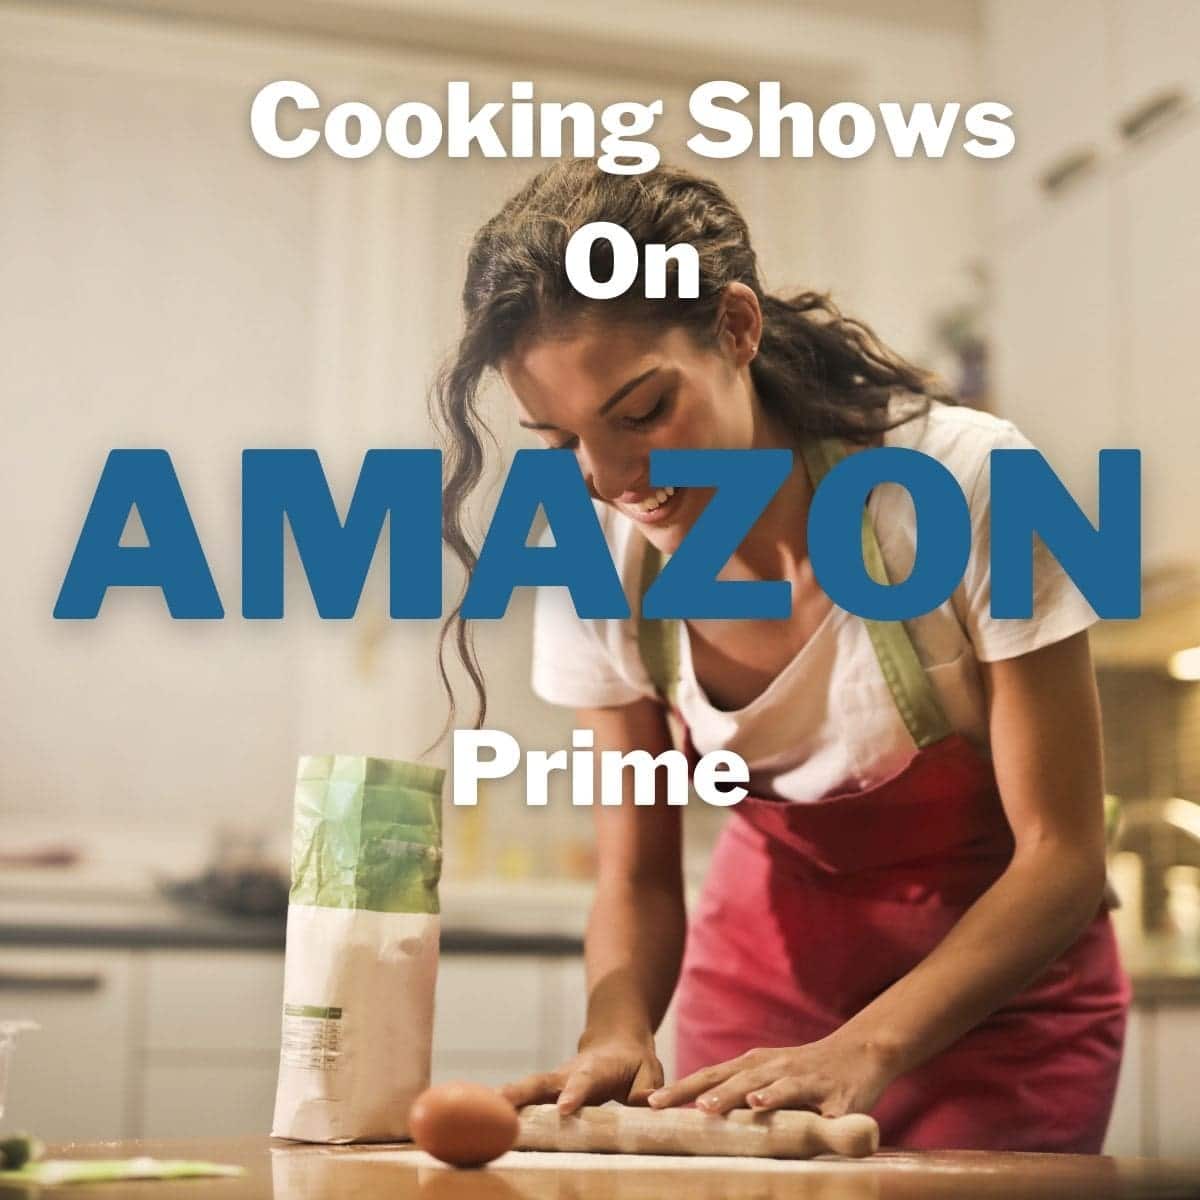 15 Best Cooking Shows On Amazon Prime for 2023